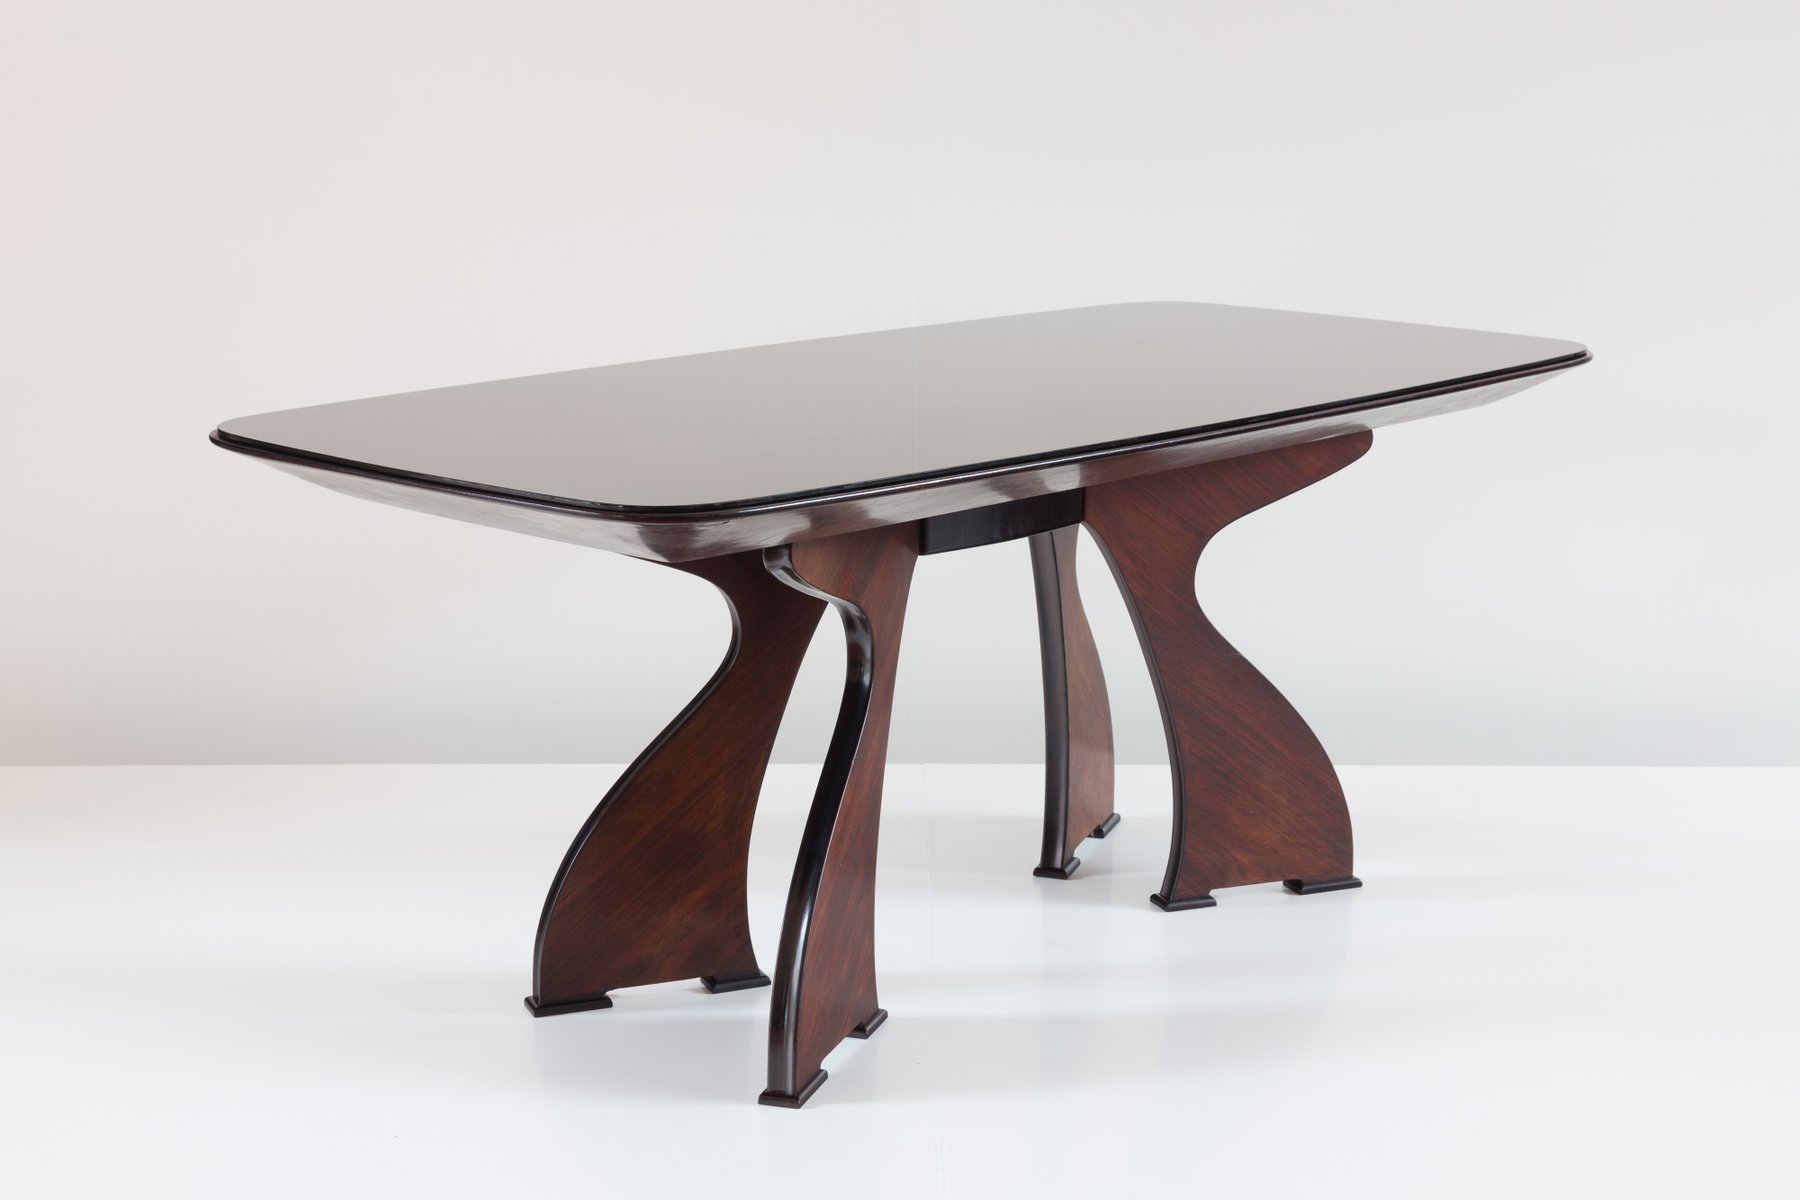 Sculptural Italian Modern Rosewood Dining Table For Sale At Pamono